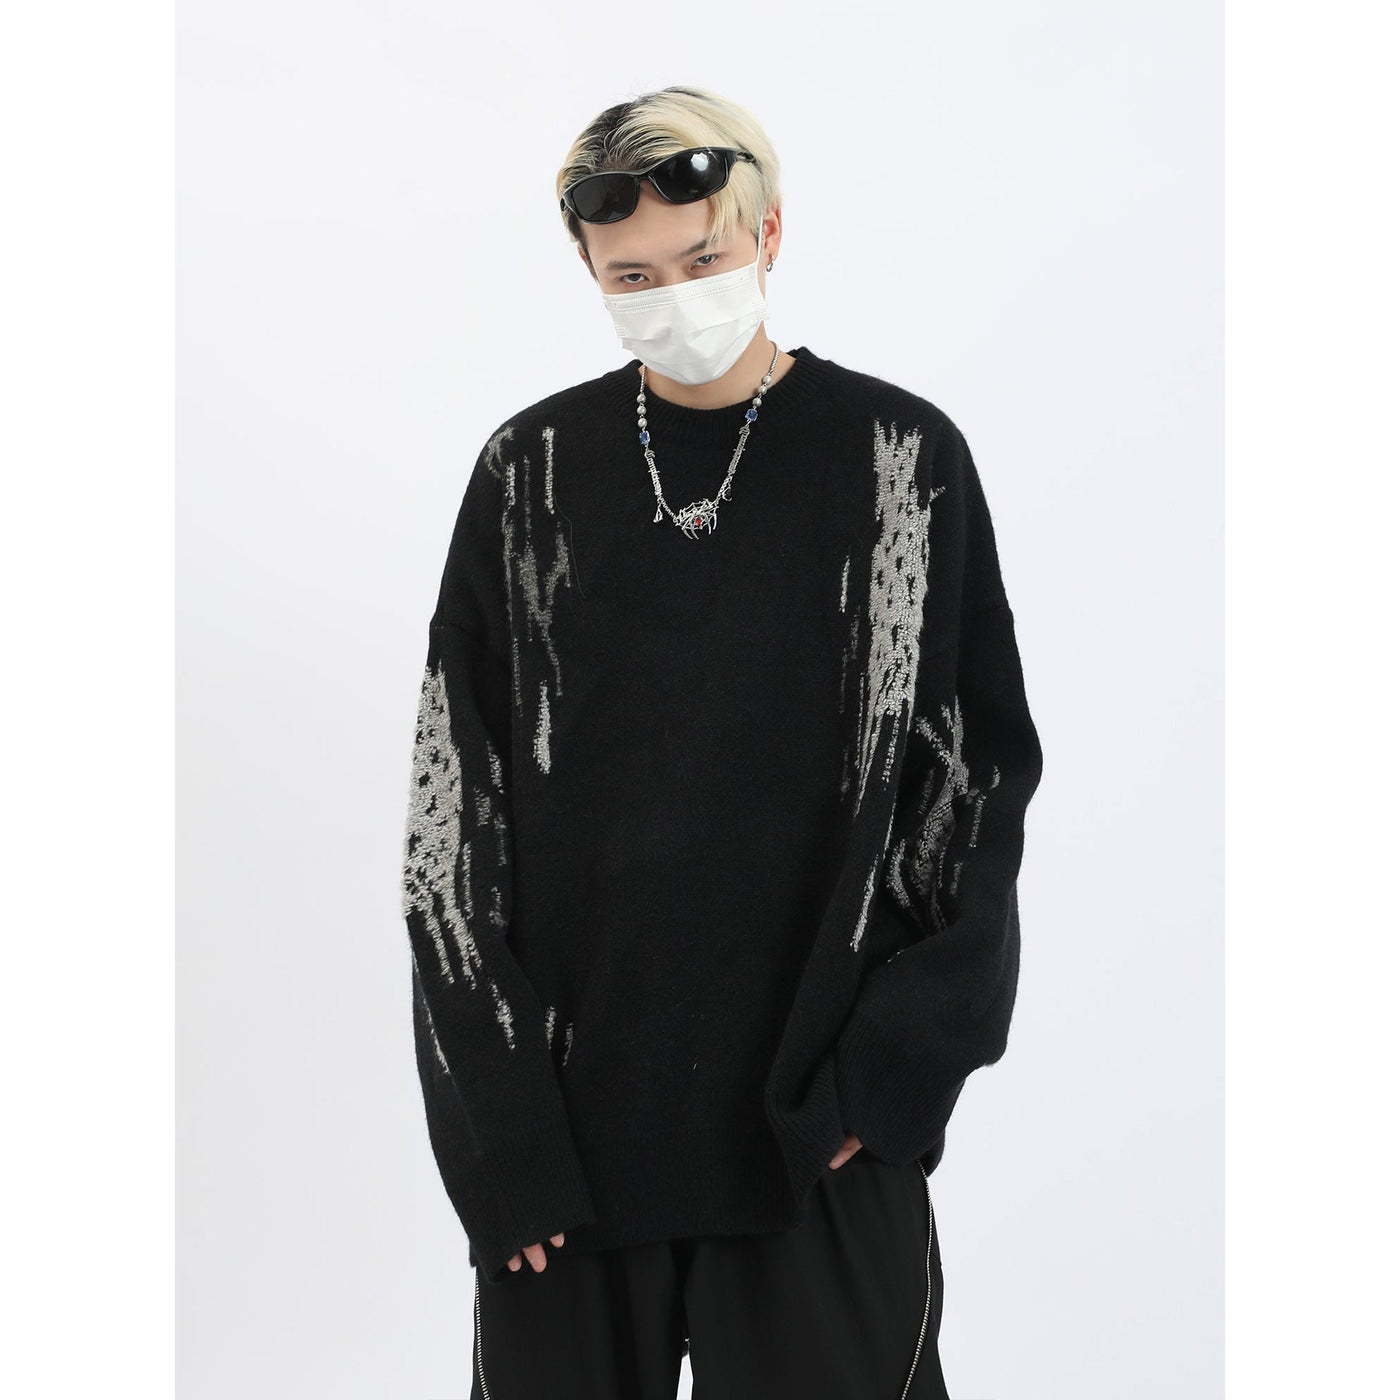 Gradient Contrast Sweater Korean Street Fashion Sweater By MaxDstr Shop Online at OH Vault